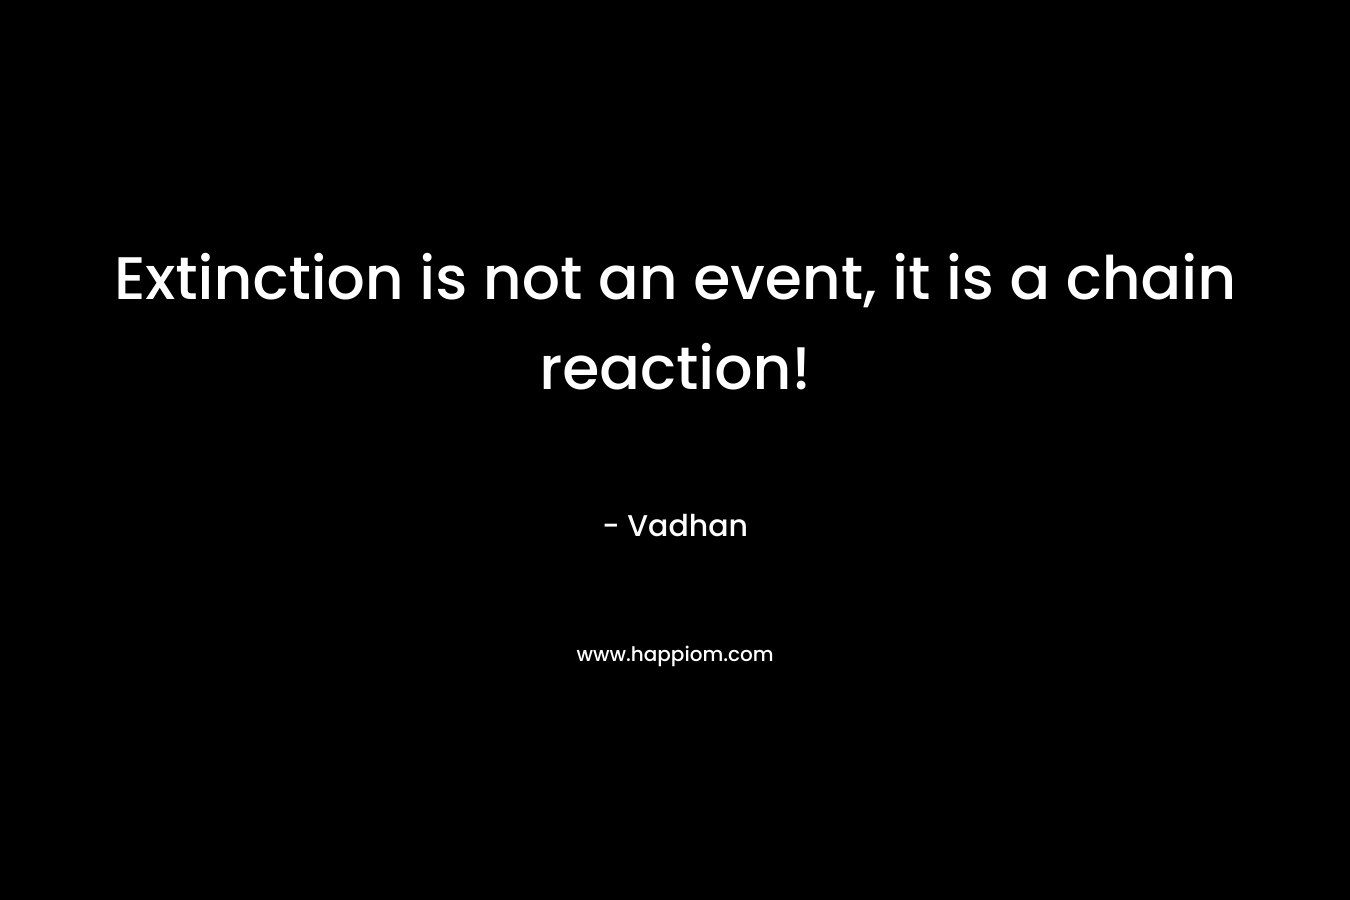 Extinction is not an event, it is a chain reaction! – Vadhan